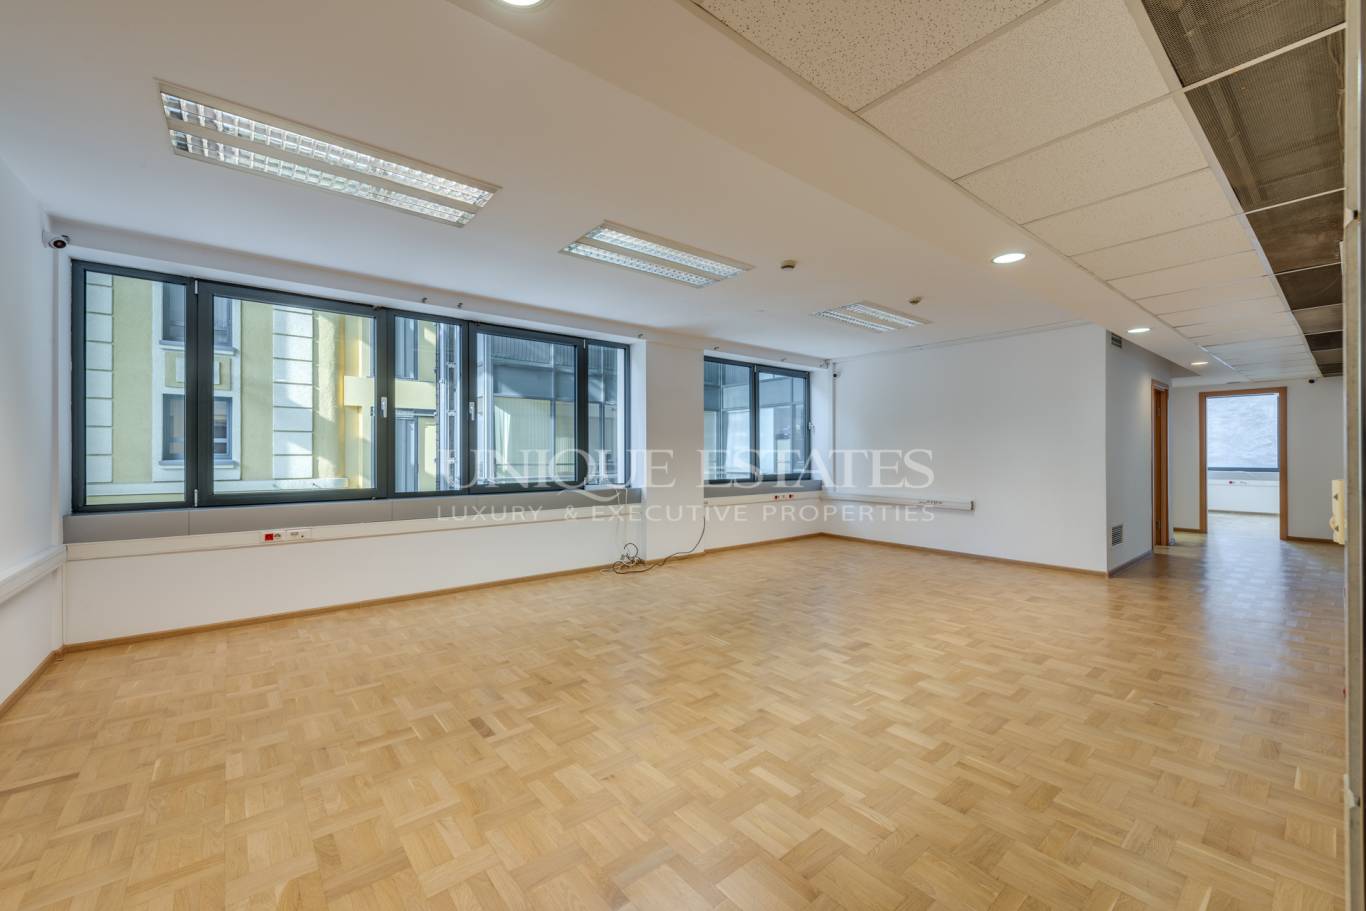 Office for rent in Sofia, Downtown with listing ID: K14005 - image 1